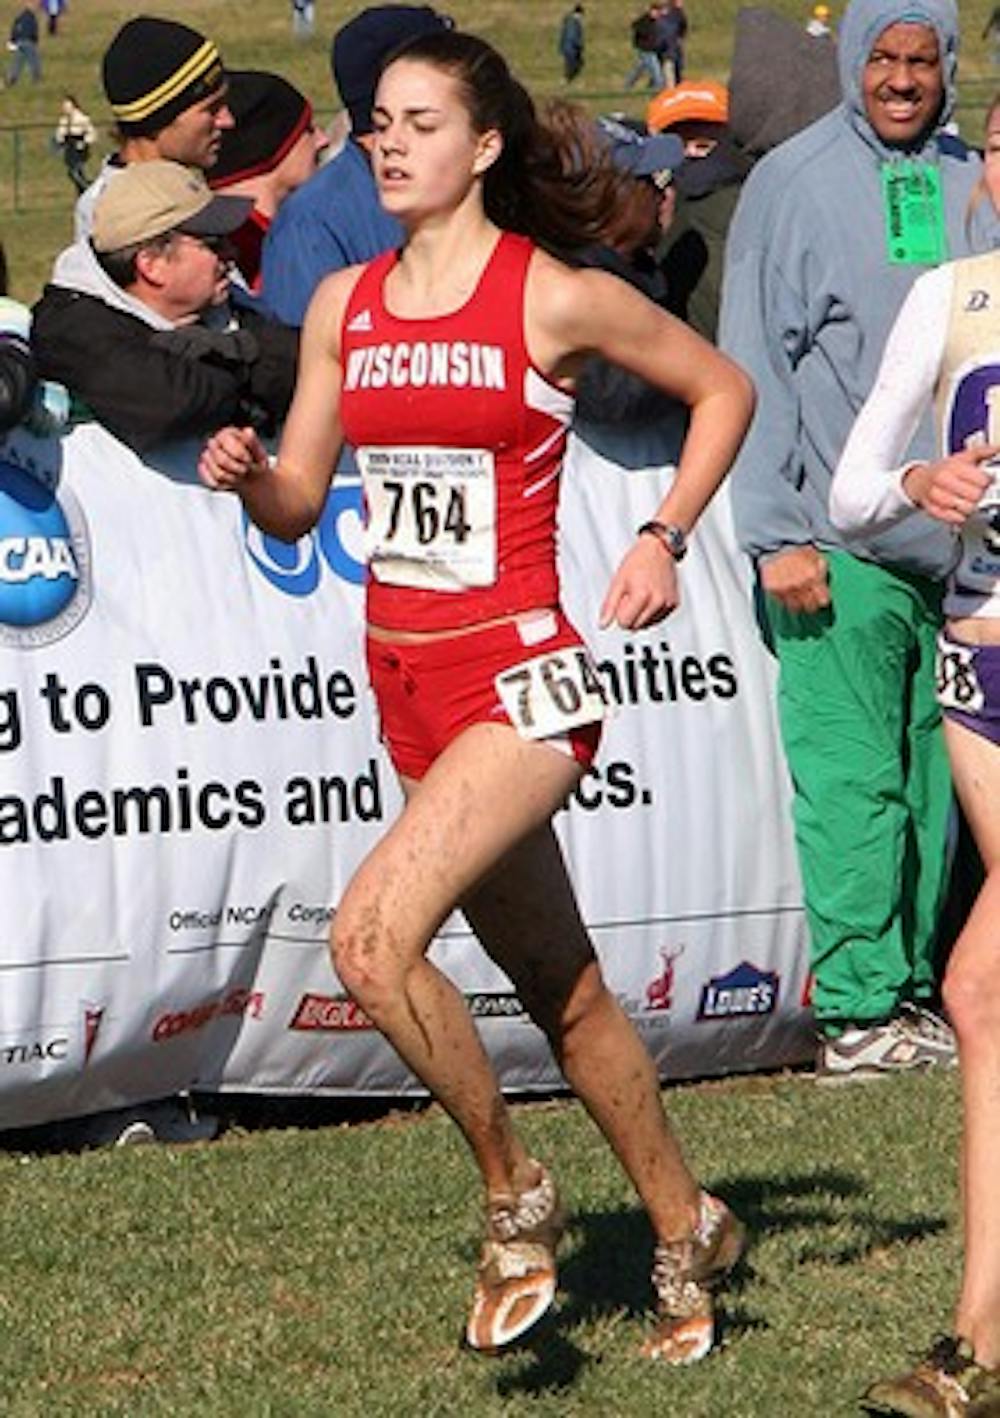 Chasing a championship: Men's cross country defending its title